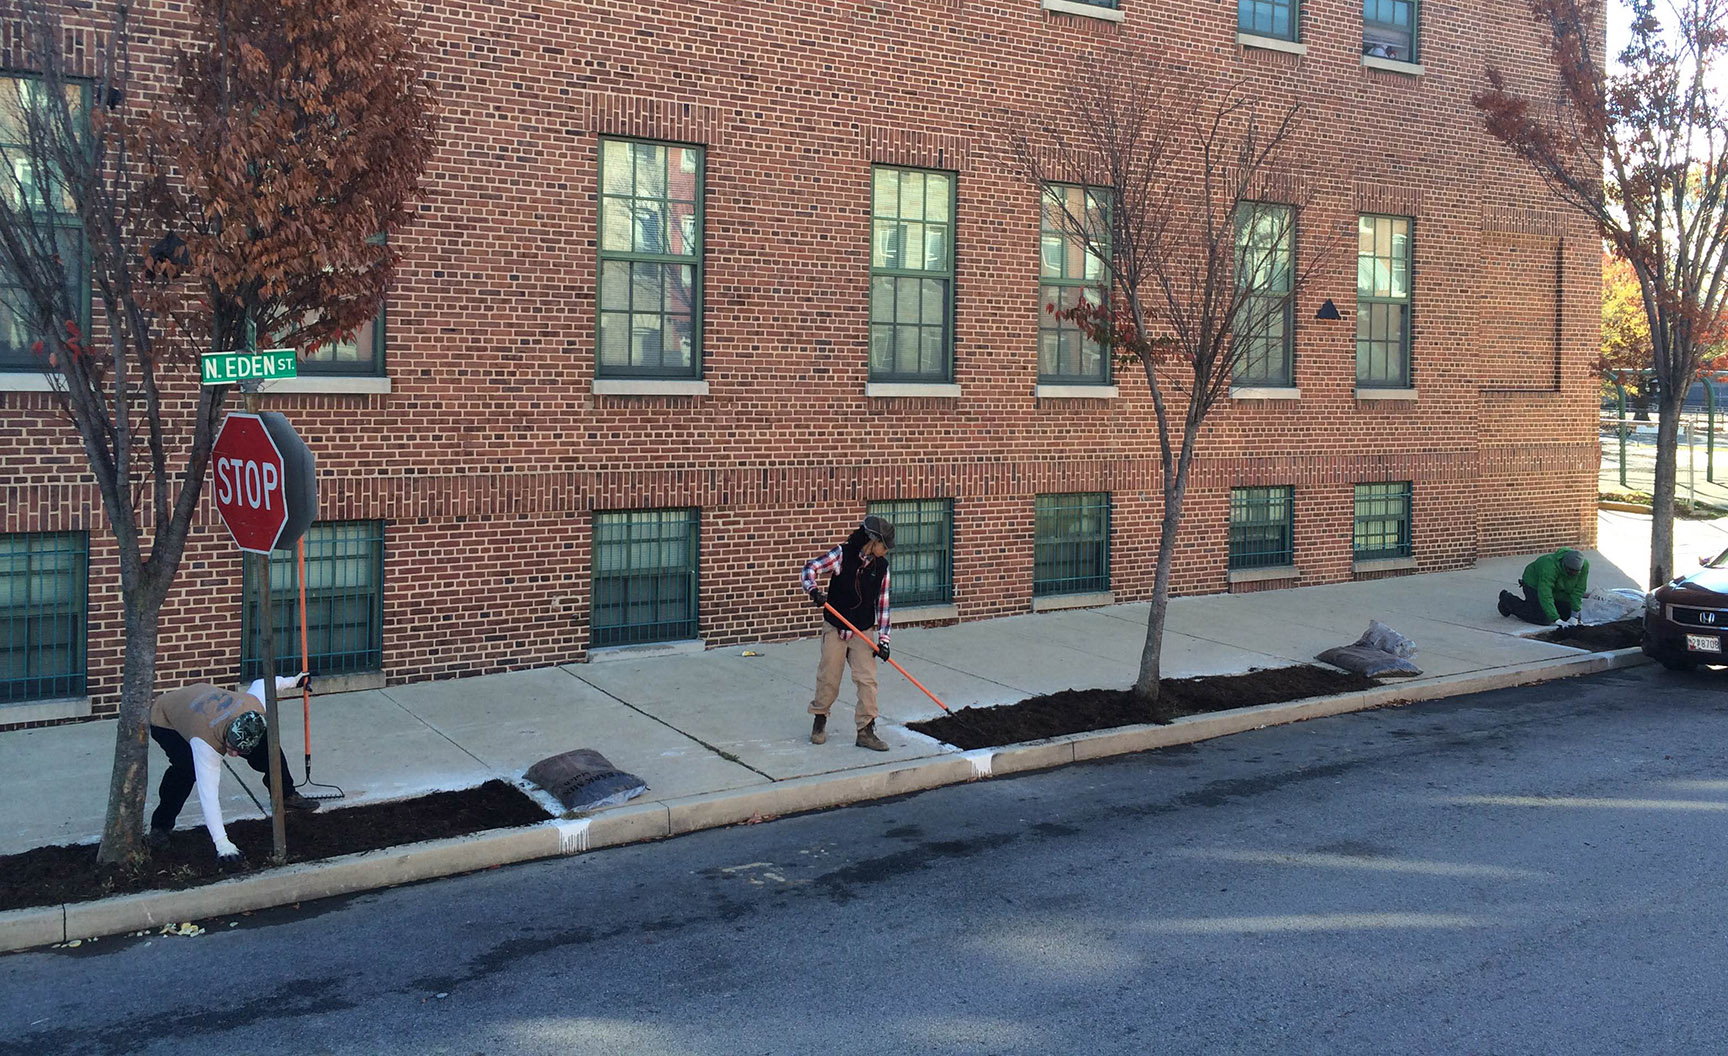 a woman is shoveling the ground in front of a brick building